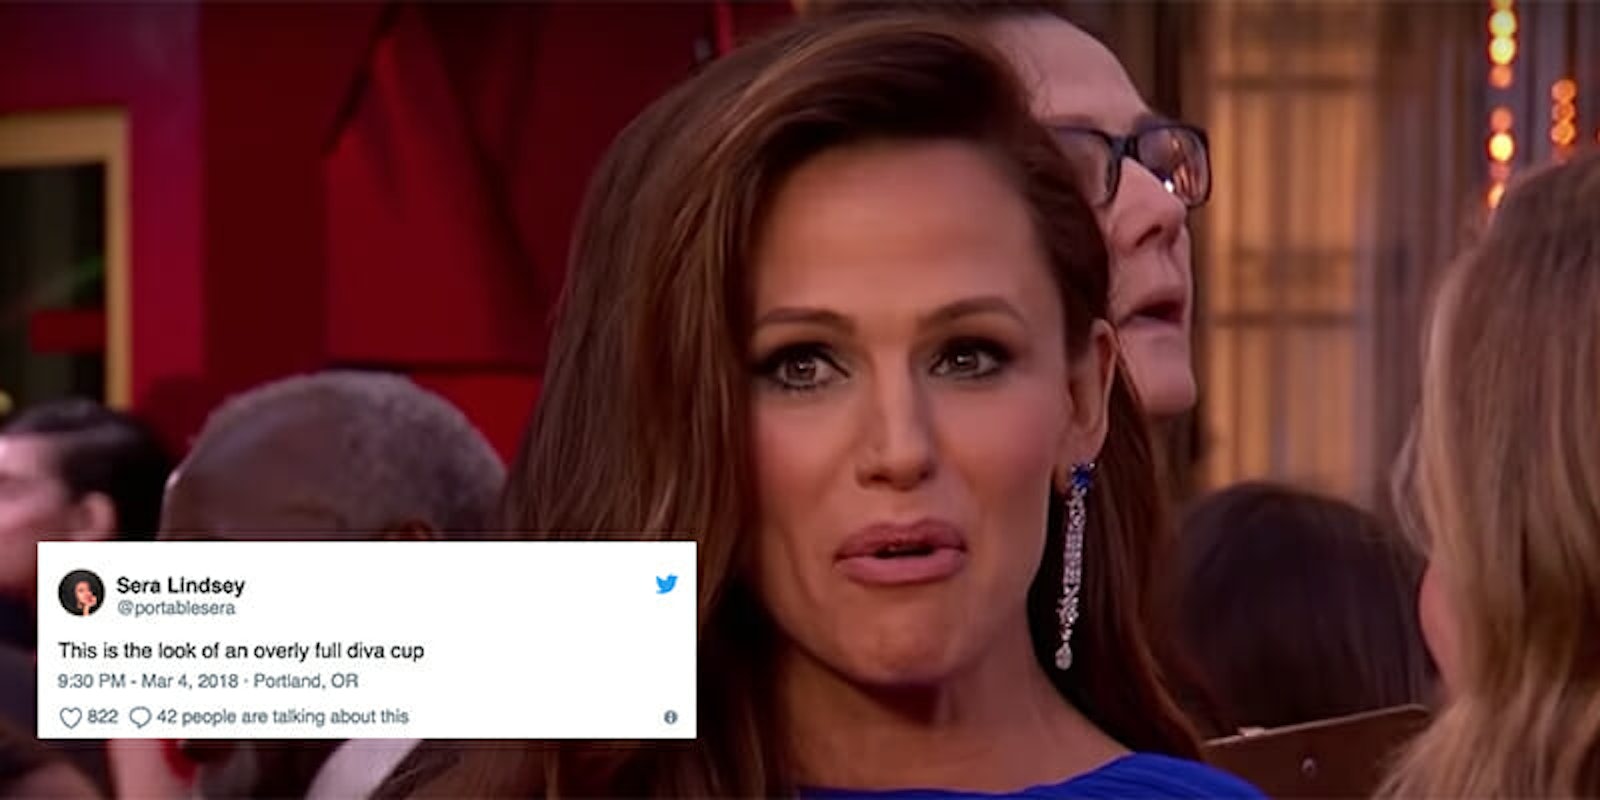 A viral video shows Jennifer Garner appearing to realize something during the Oscars.